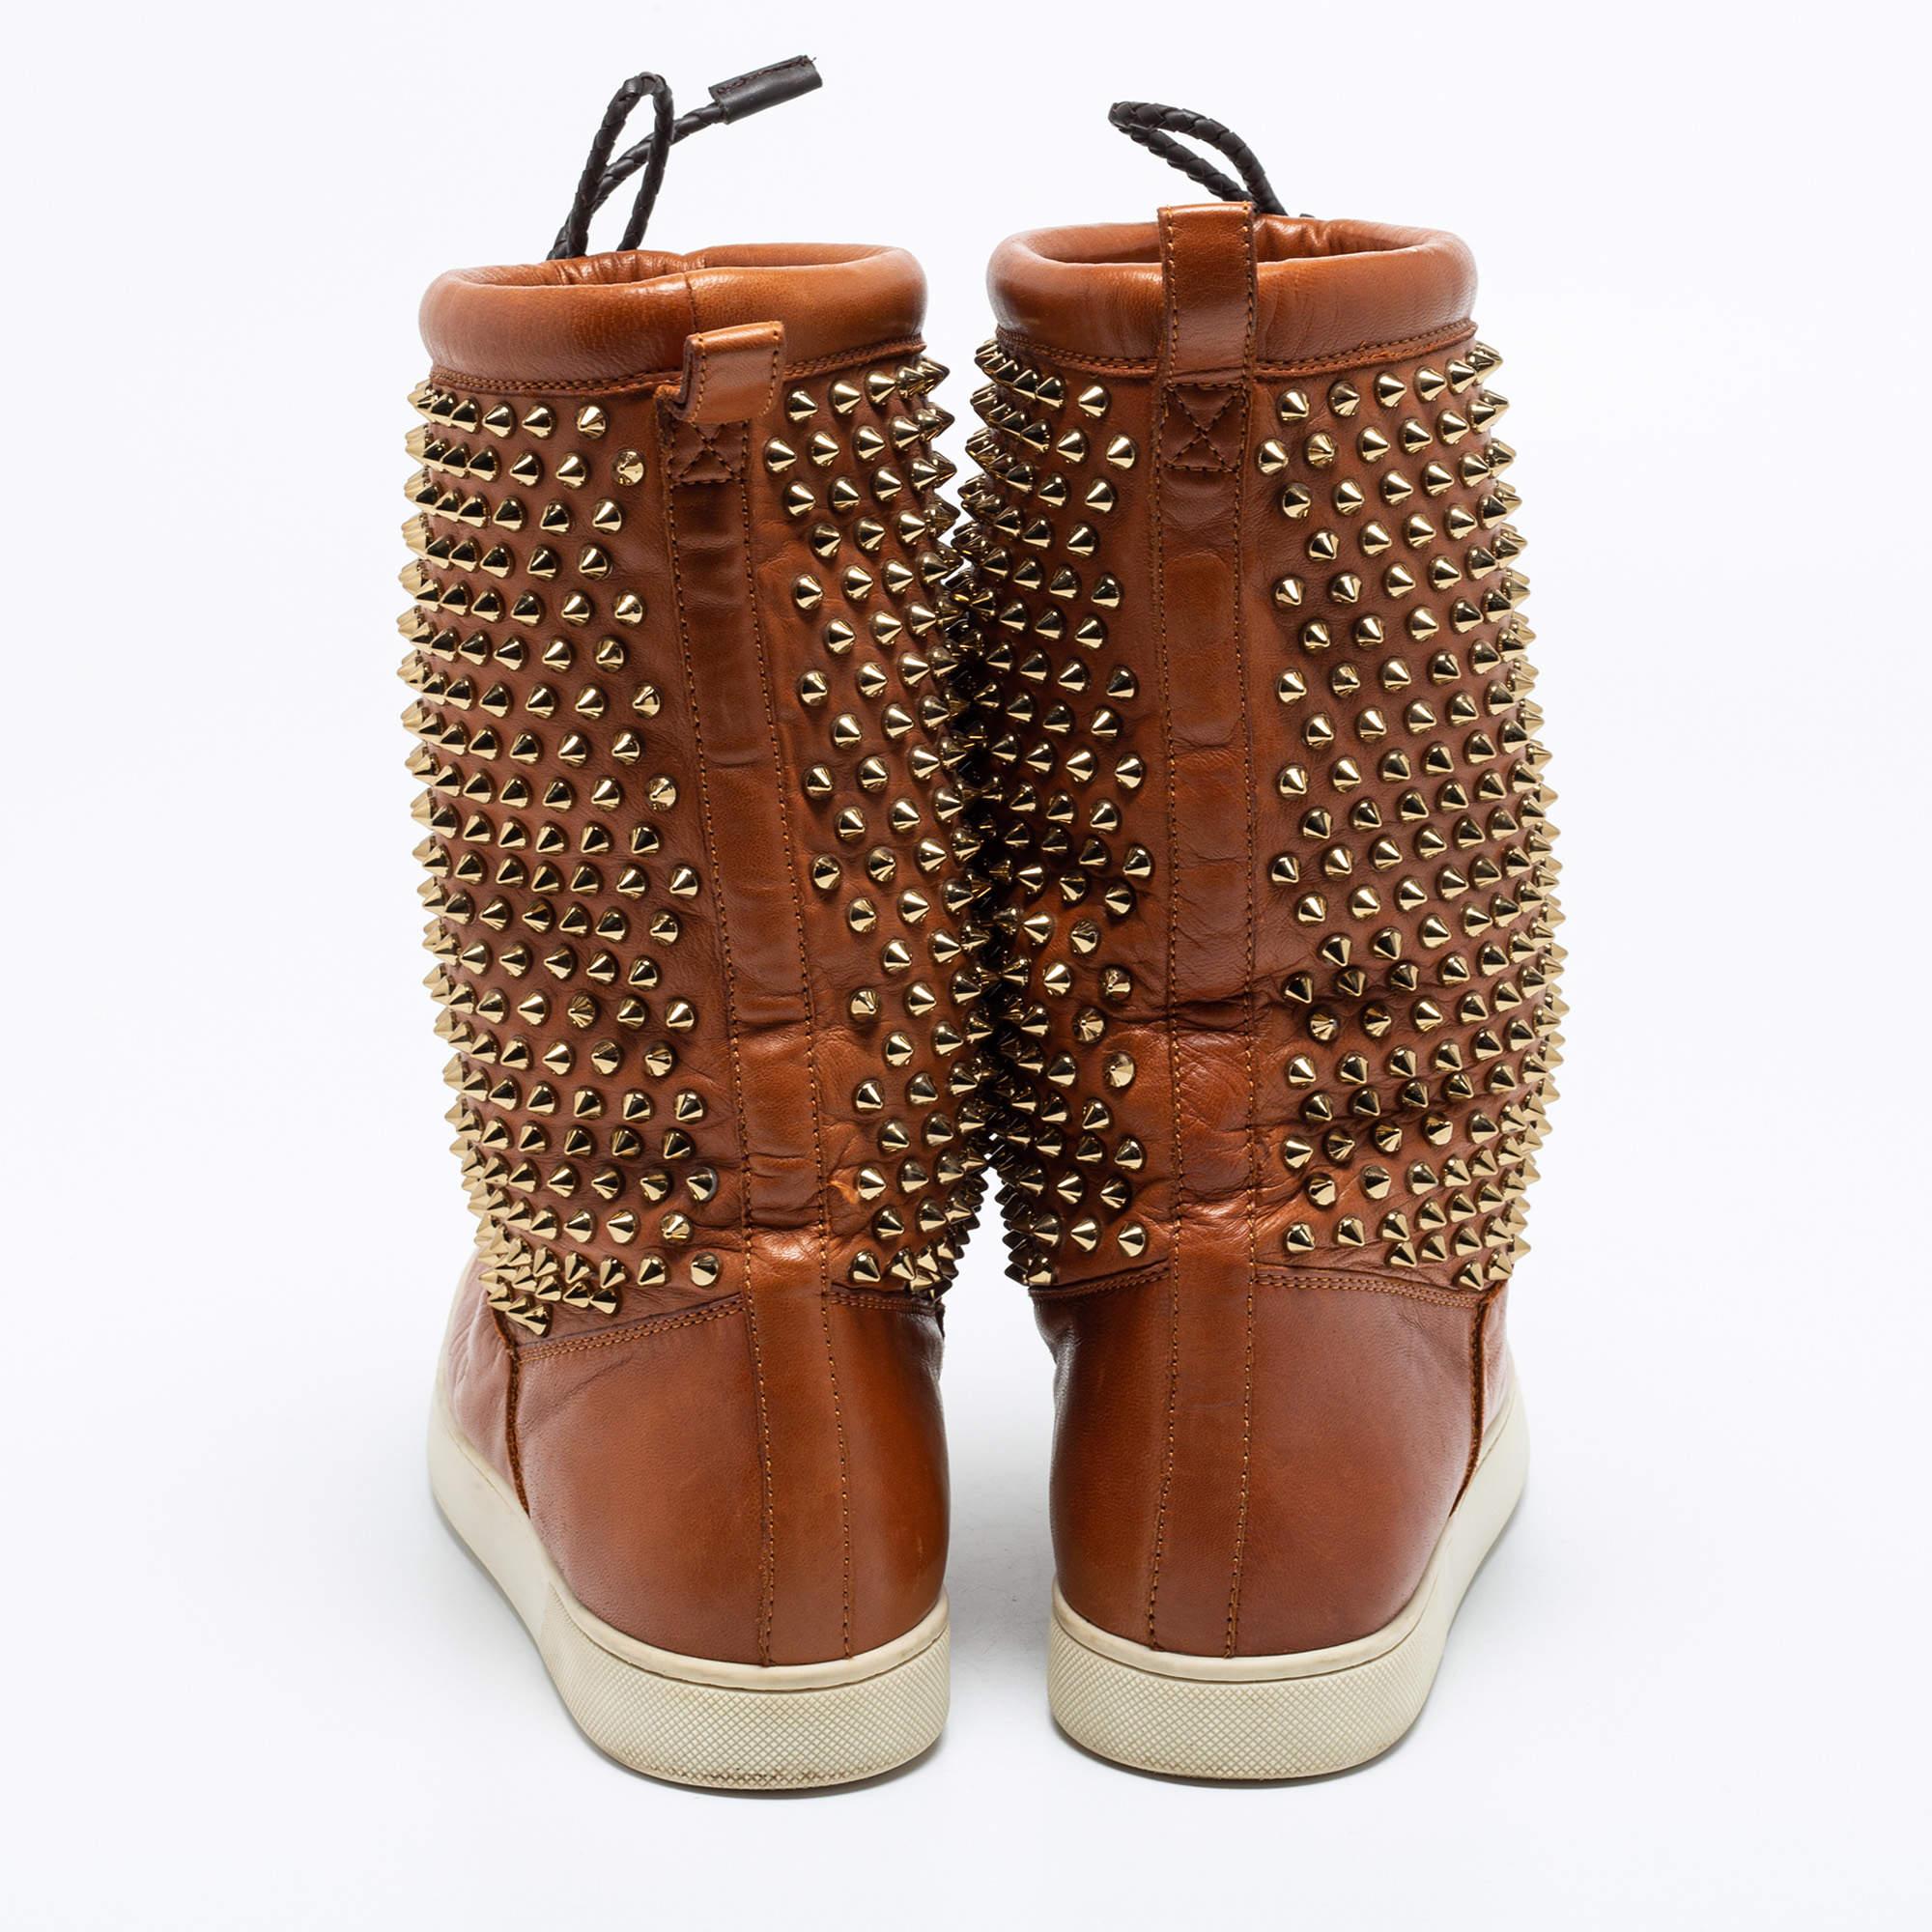 Christian Louboutin Brown Spiked Leather Surlapony Mid Calf Boots Size 38.5 For Sale 2